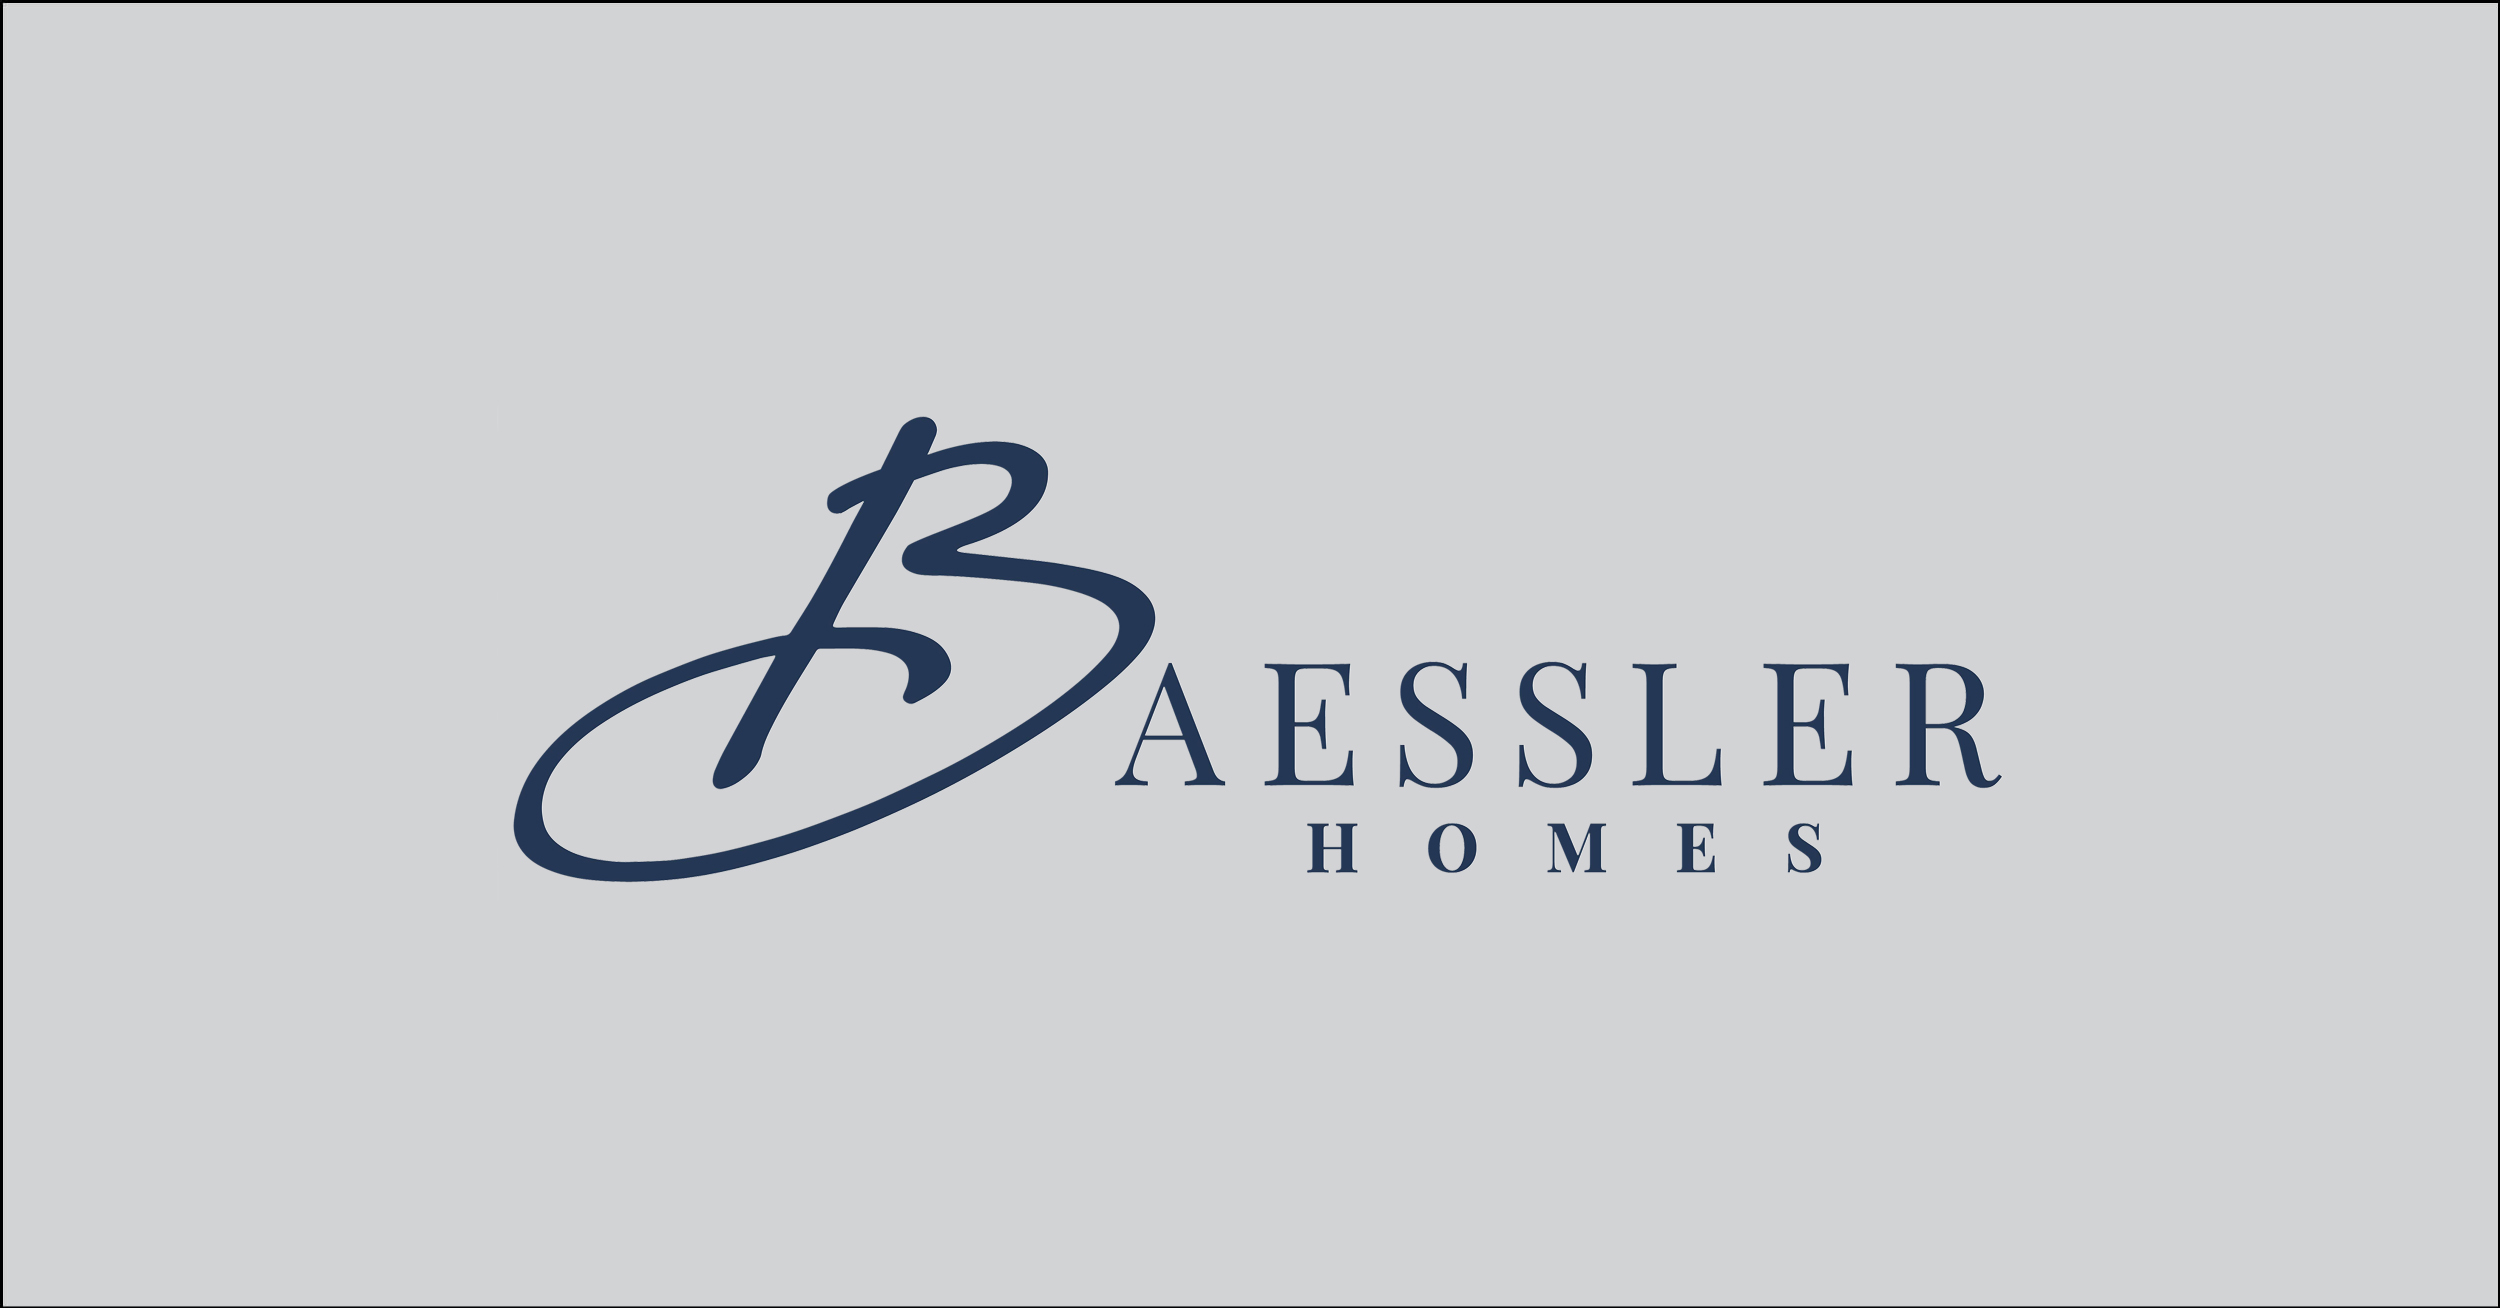 Find new construction or search for new homes and communities by Baessler Homes in Colorado